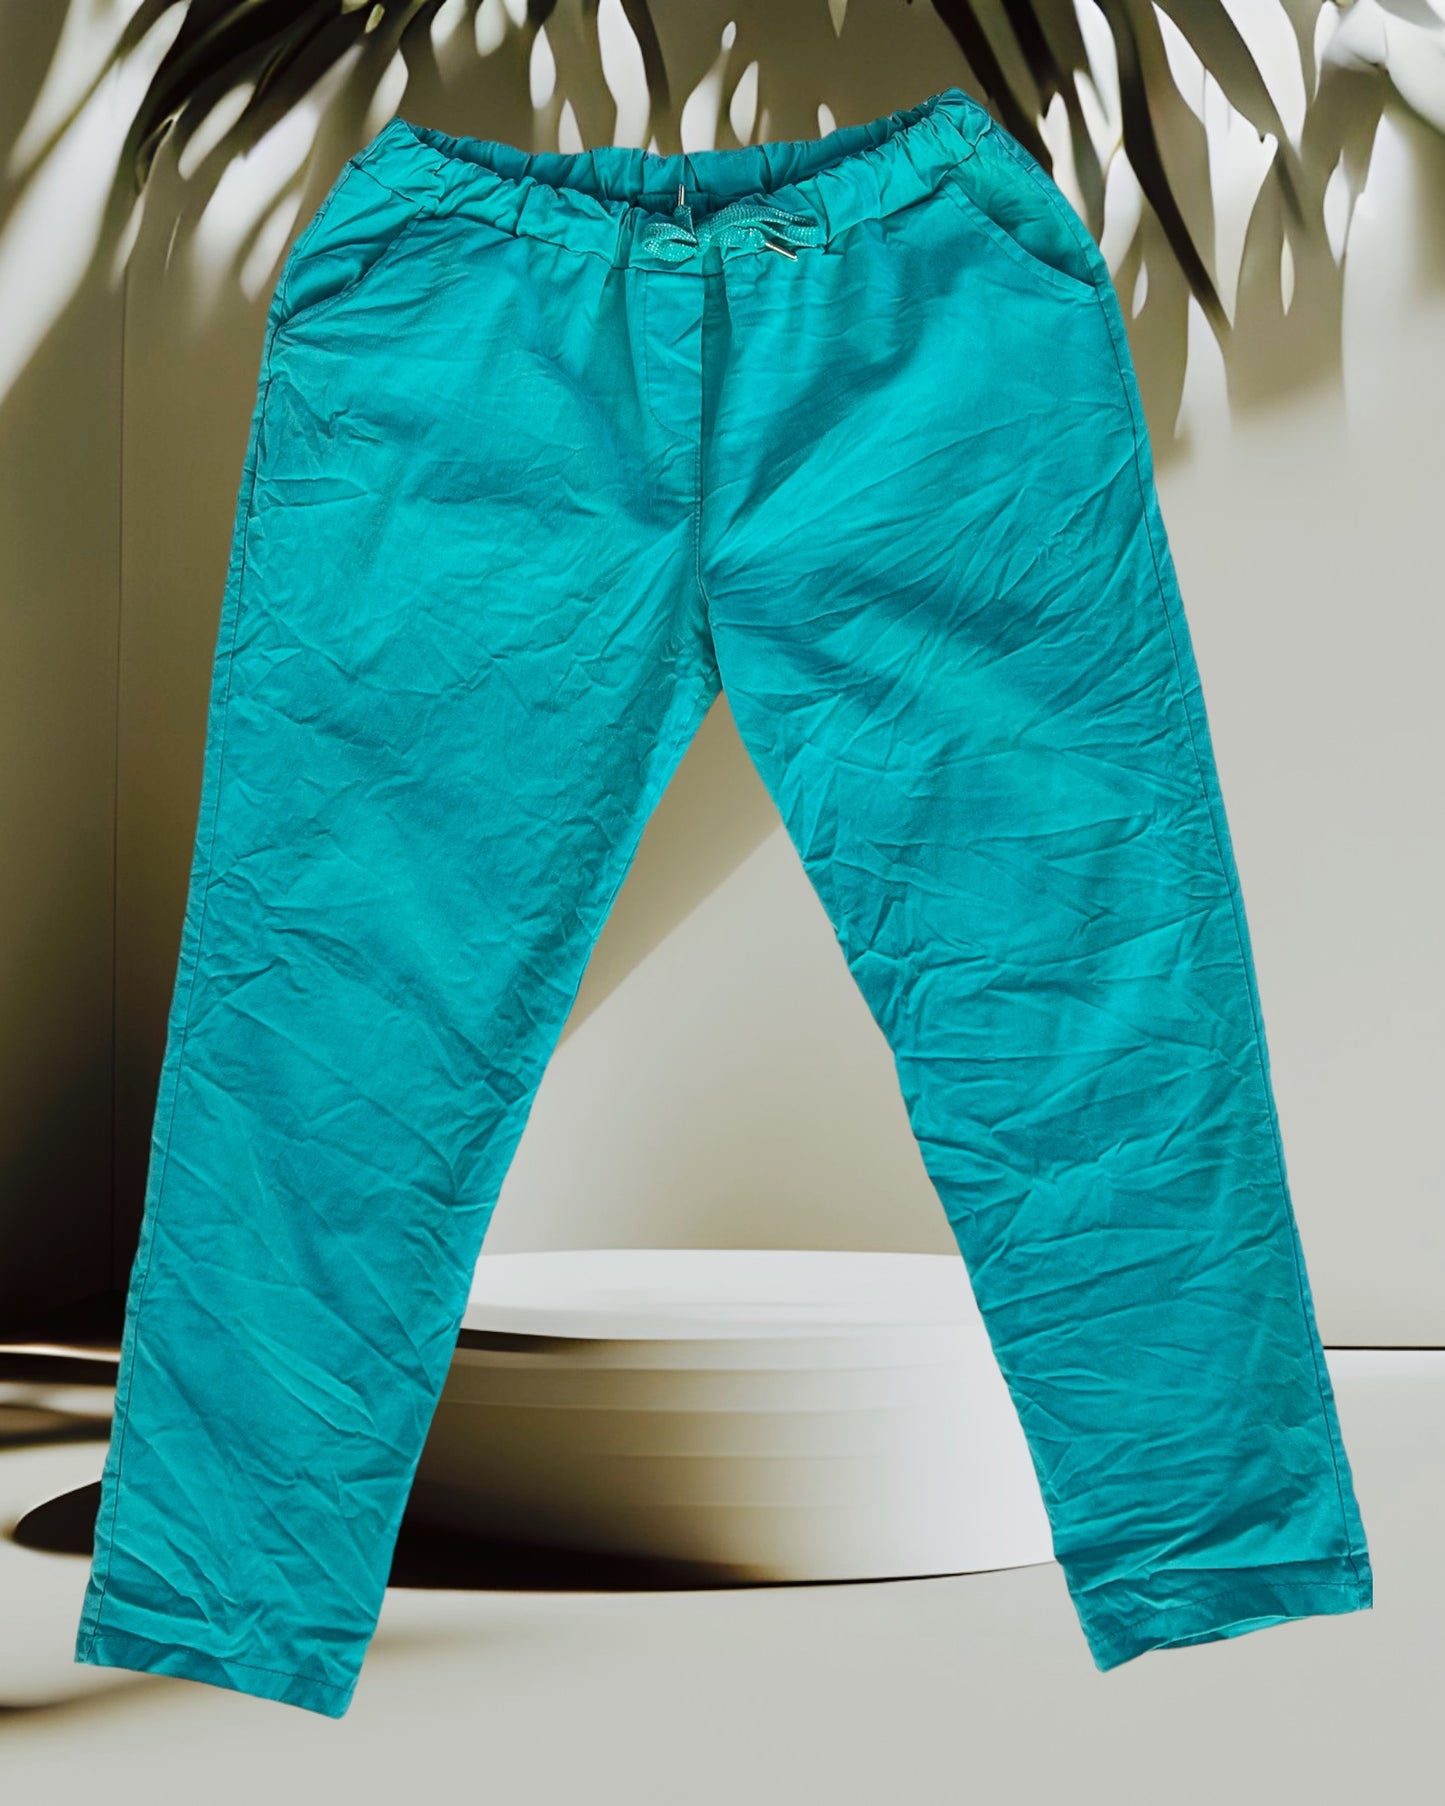 FRED - PANTALON SPORTSWEAR TURQUOISE TAILLE 46 A 52